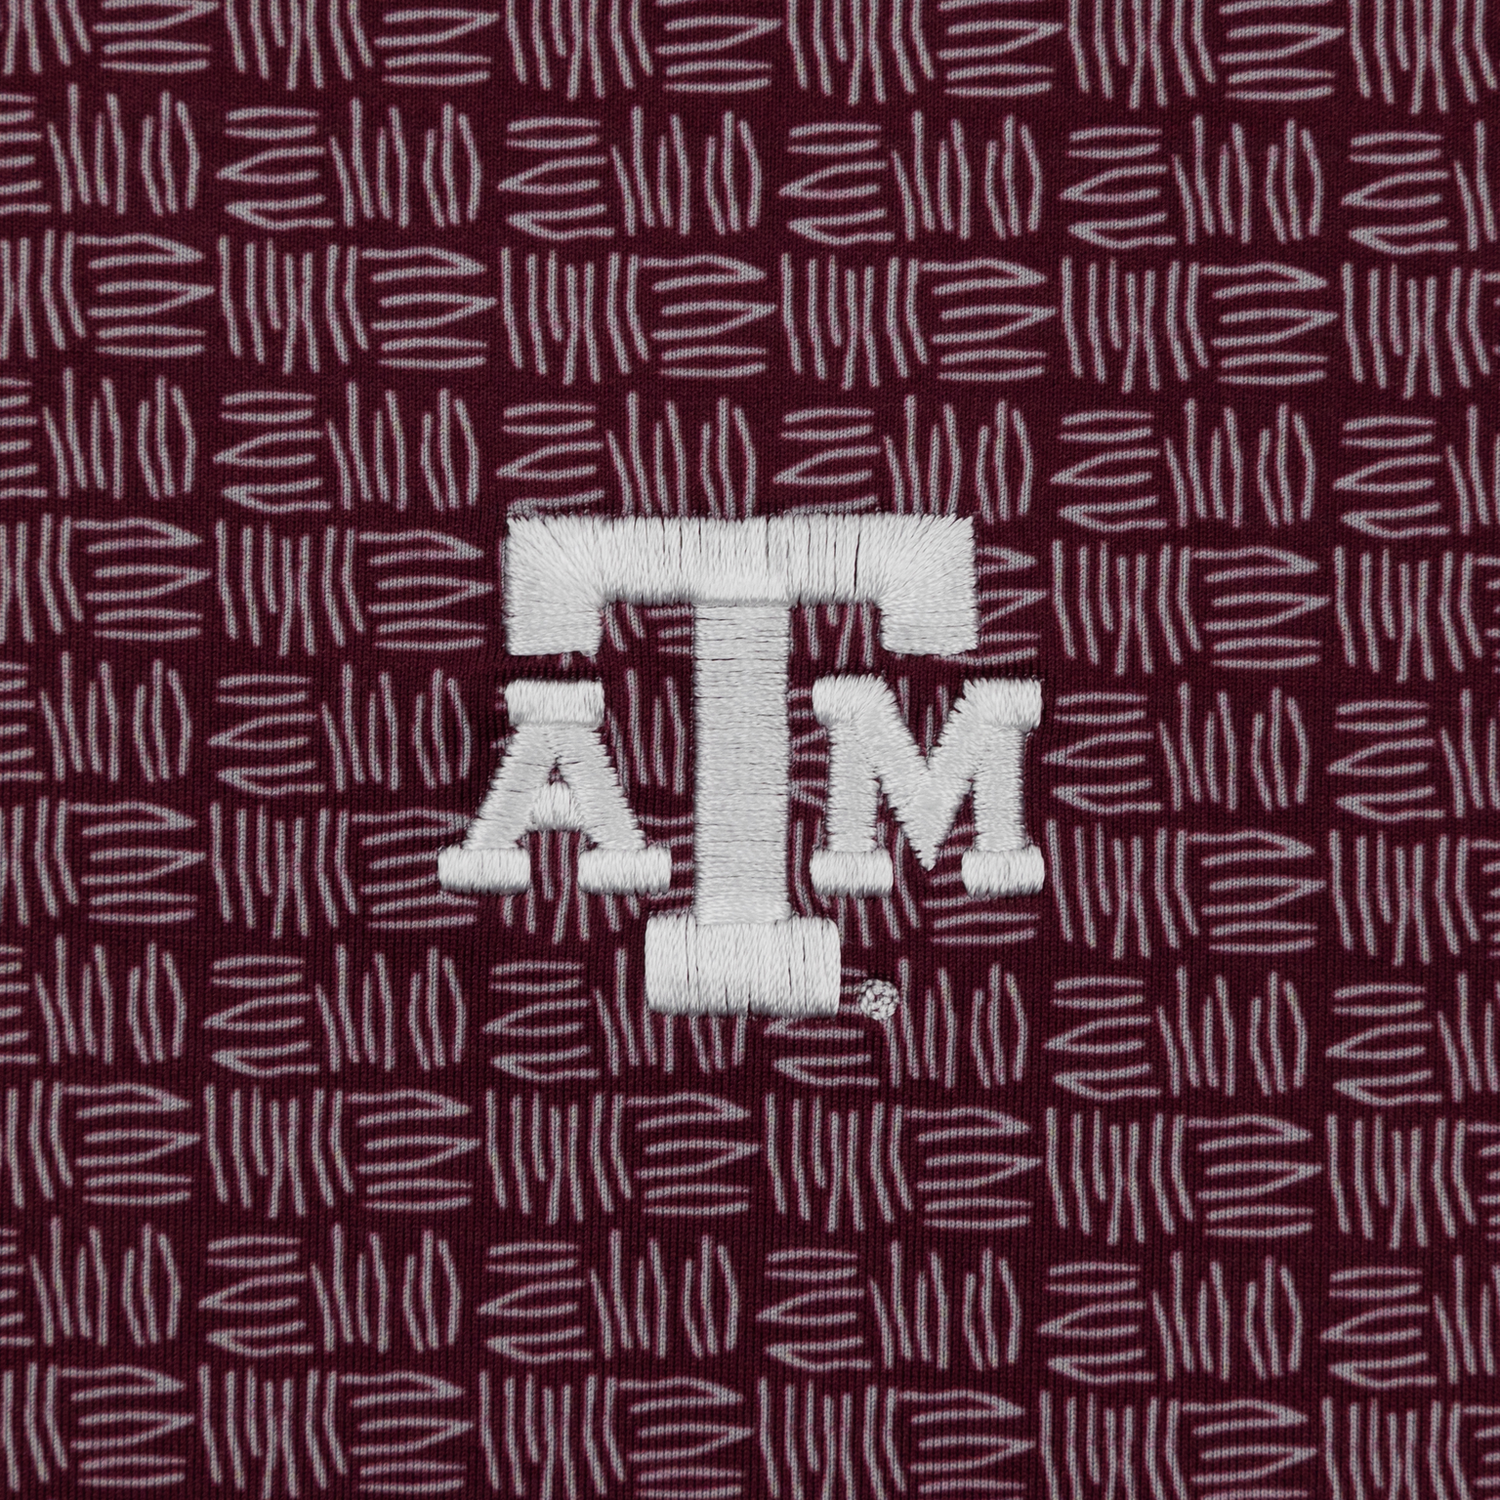 Texas A&M Horn Legend Squiggly Polo